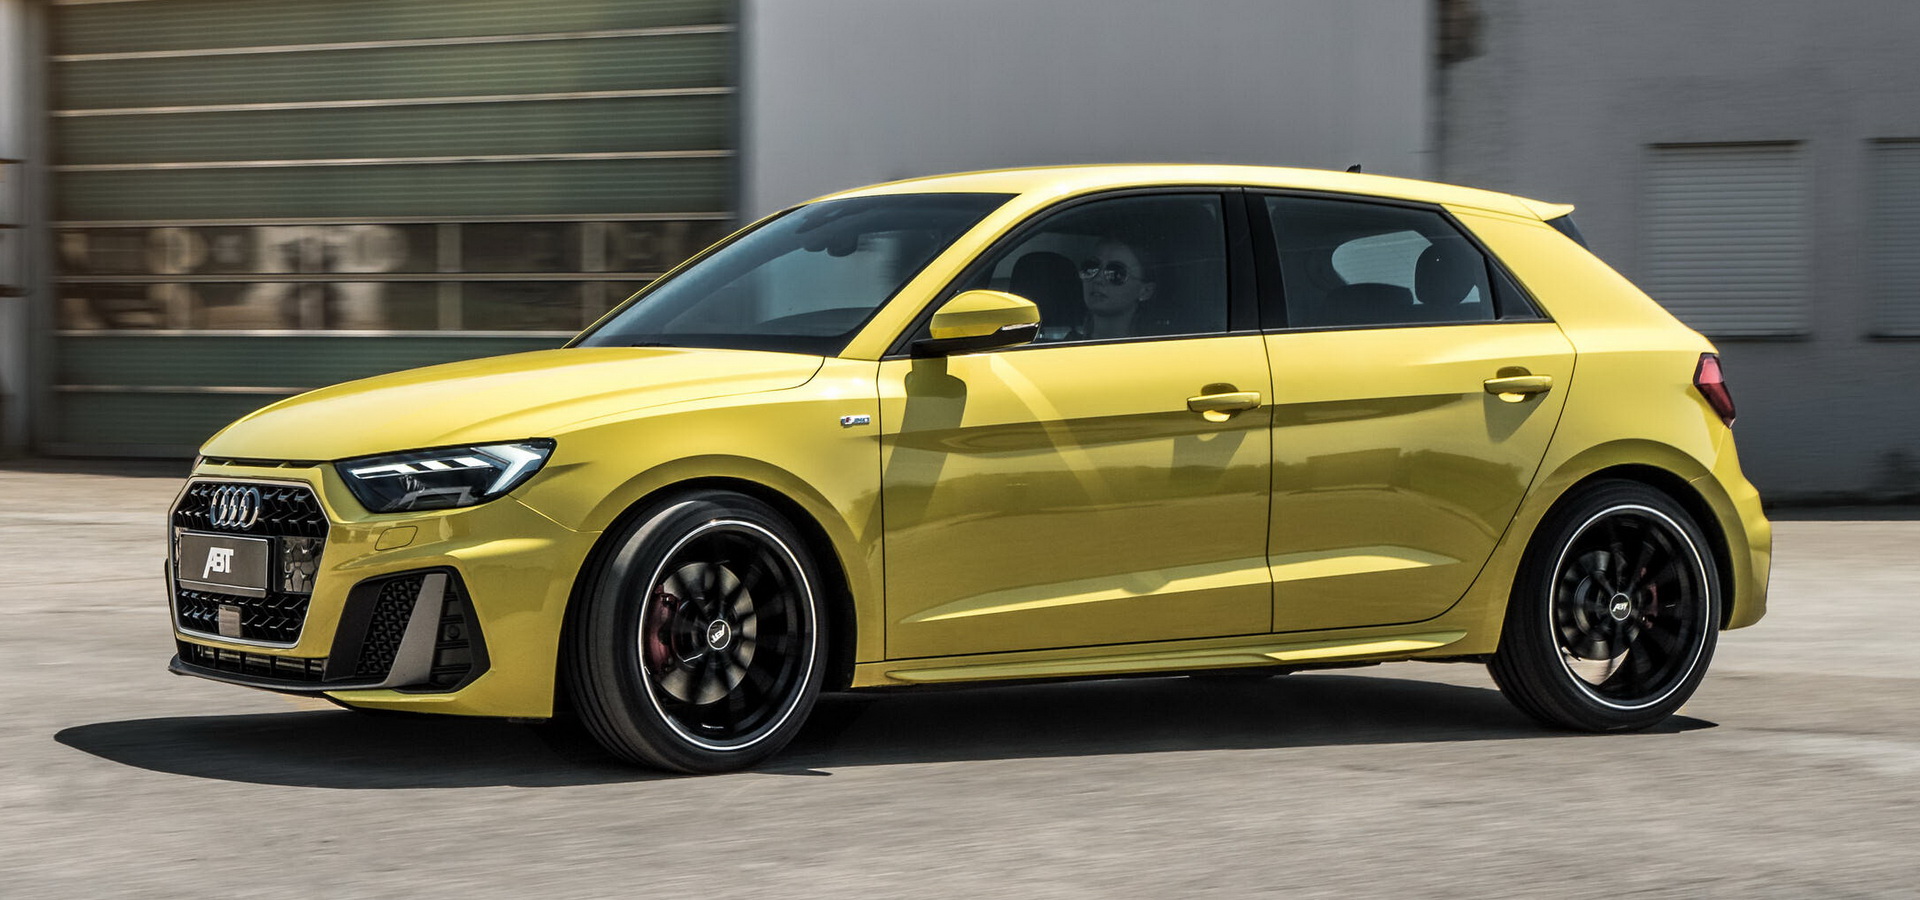 Audi A1 40 TFSI Gets Force Fed 236 HP By ABT Sportsline